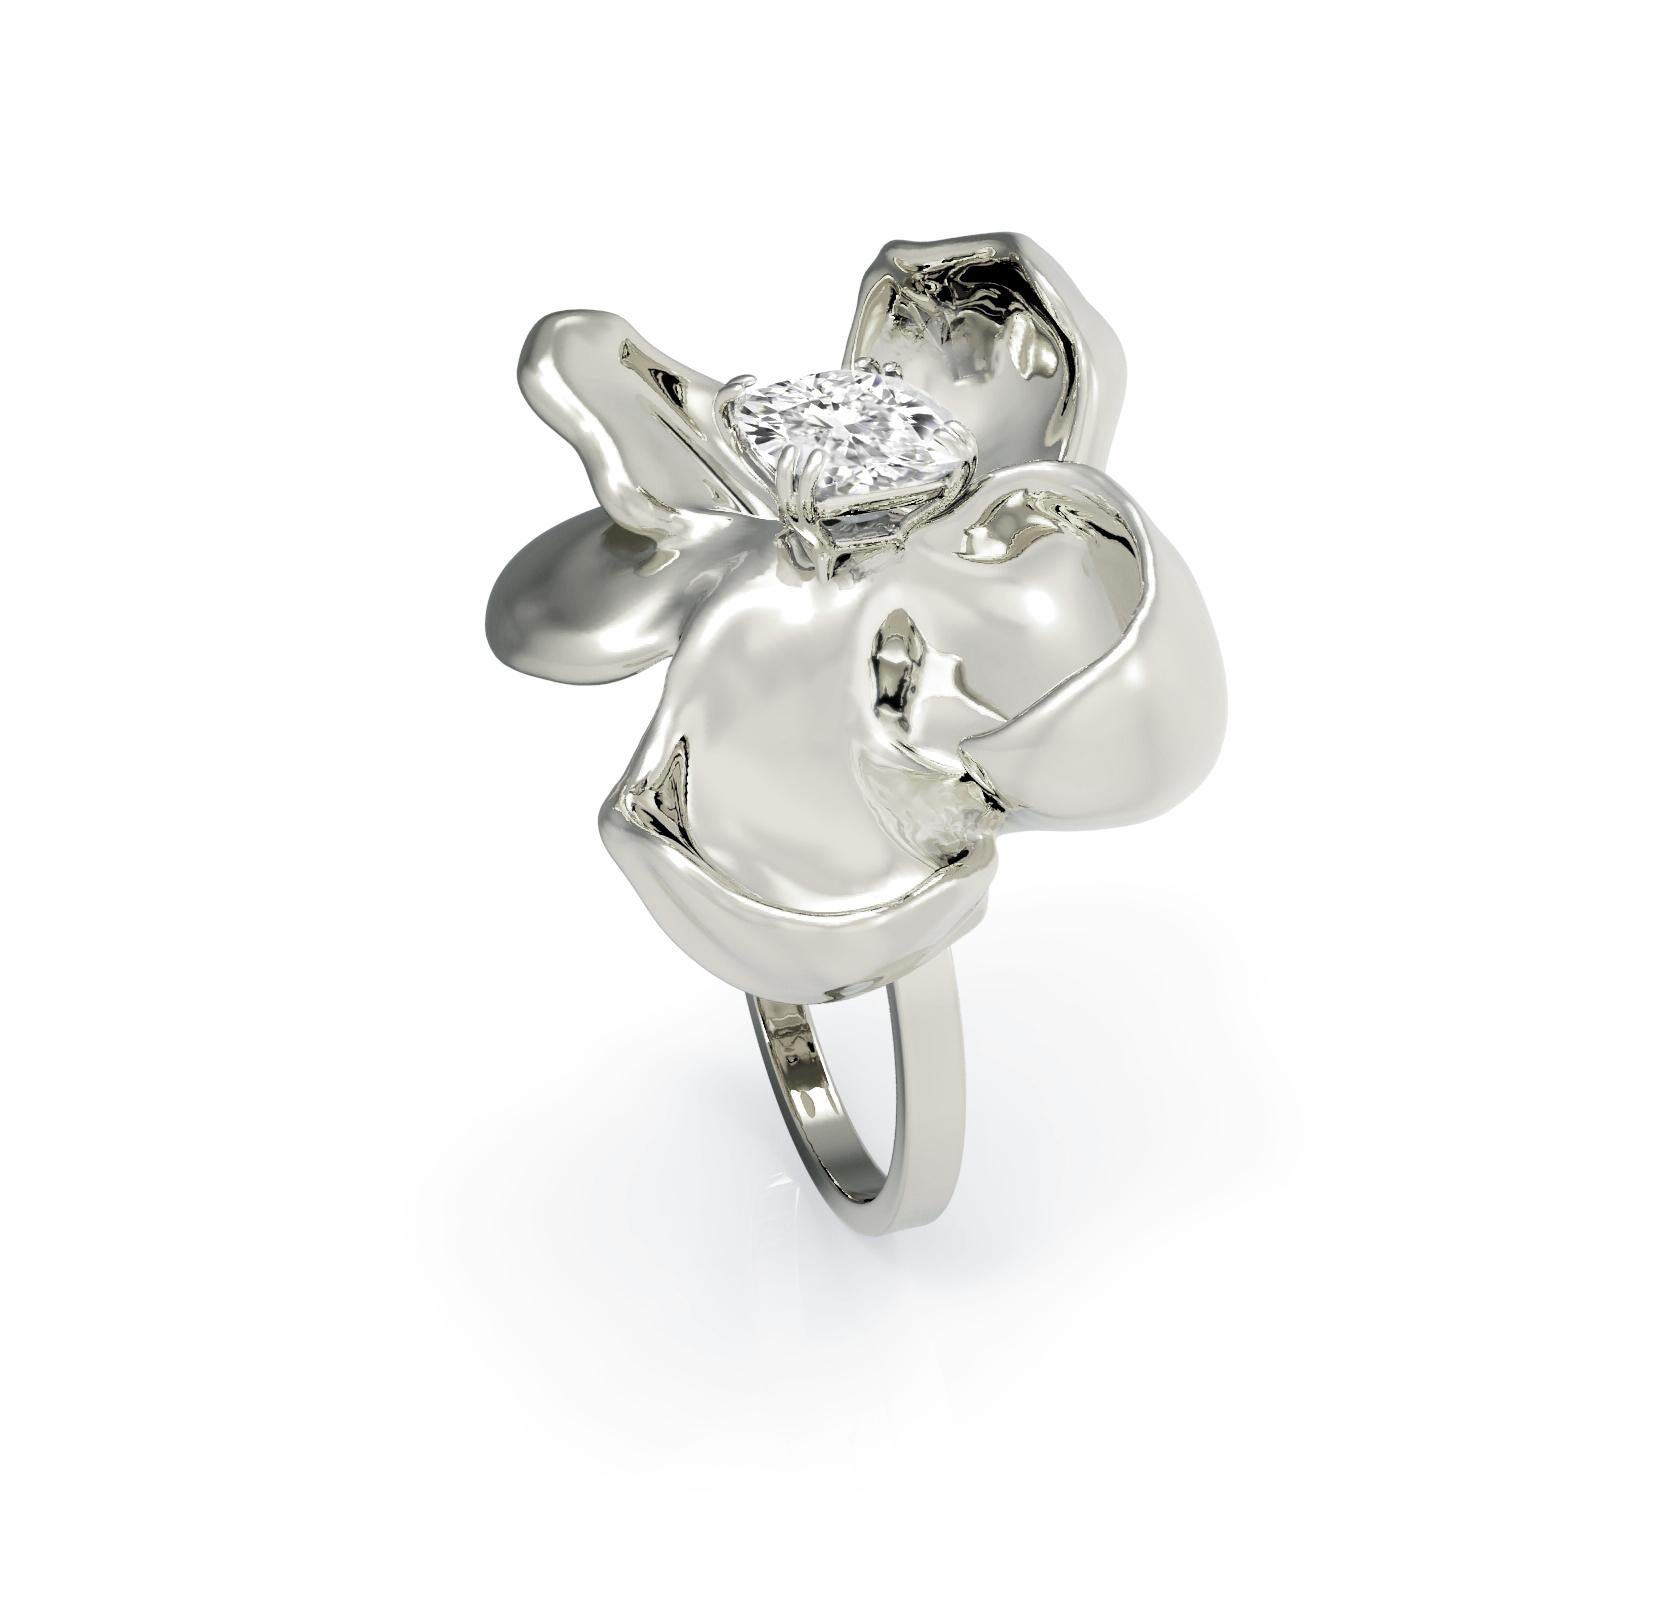 This Magnolia Flower engagement or wedding ring is made of 18 karat white gold and features a crushed ice cushion diamond. Designed by oil painter and 3D jewellery designer Polya Medvedeva, the ring boasts 60 different designs to ensure it looks